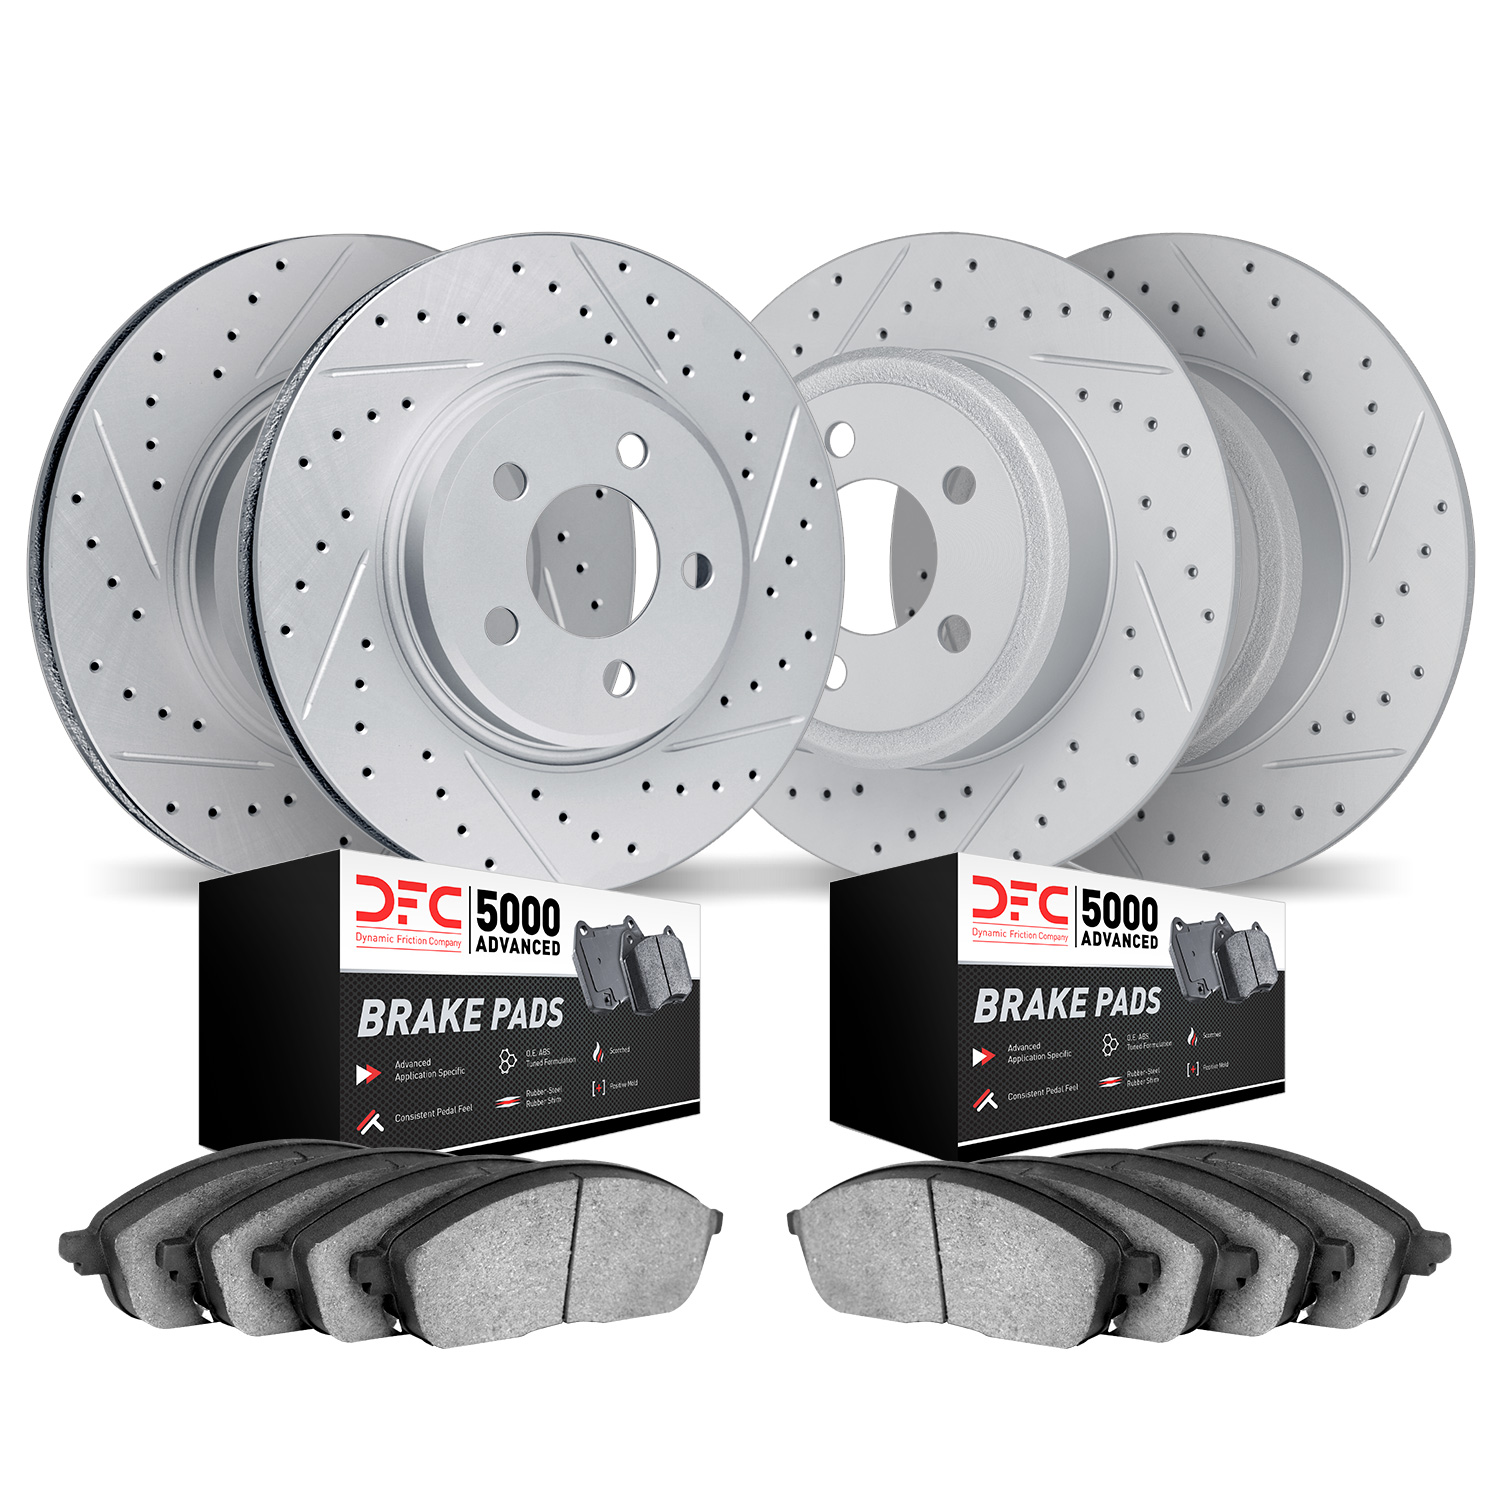 2504-42065 Geoperformance Drilled/Slotted Rotors w/5000 Advanced Brake Pads Kit, 2015-2015 Mopar, Position: Front and Rear